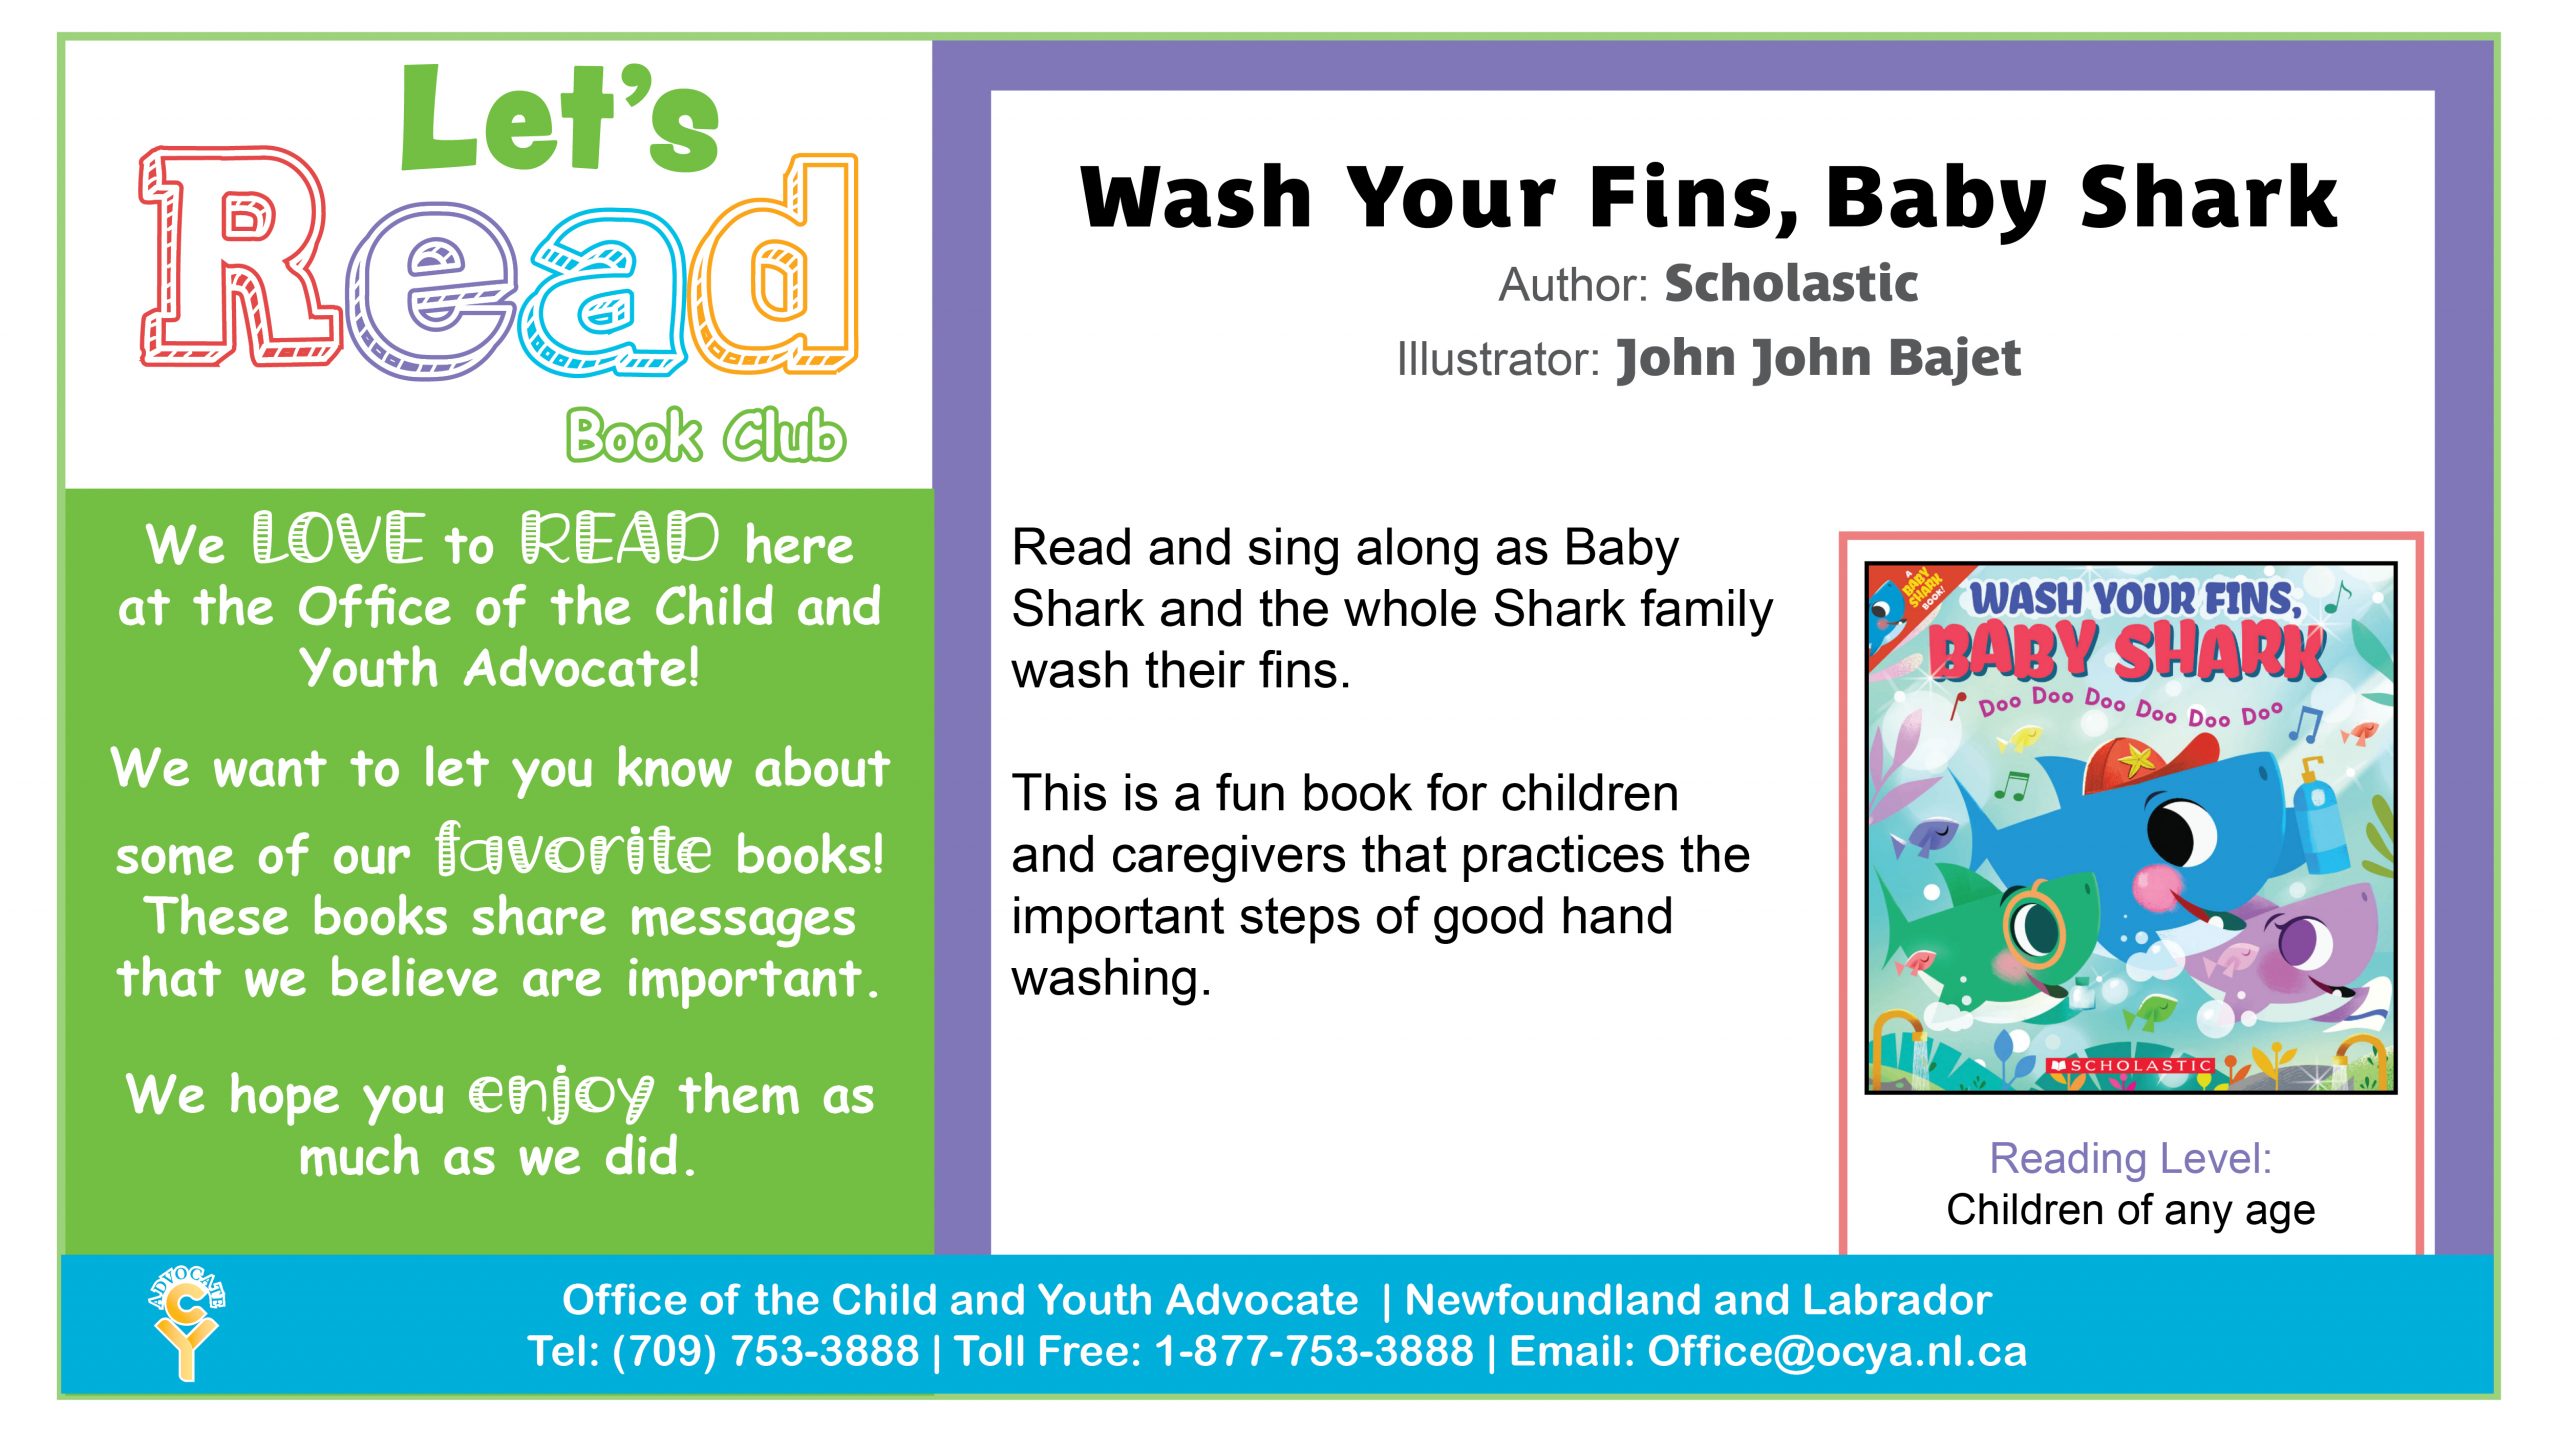 Wash Your Fins, Baby Shark, by Scholastic. Read and sing along as Baby Shark and the whole shark family wash their fins. This is a fun book for children and caregivers that practices the important steps of good hand washing.